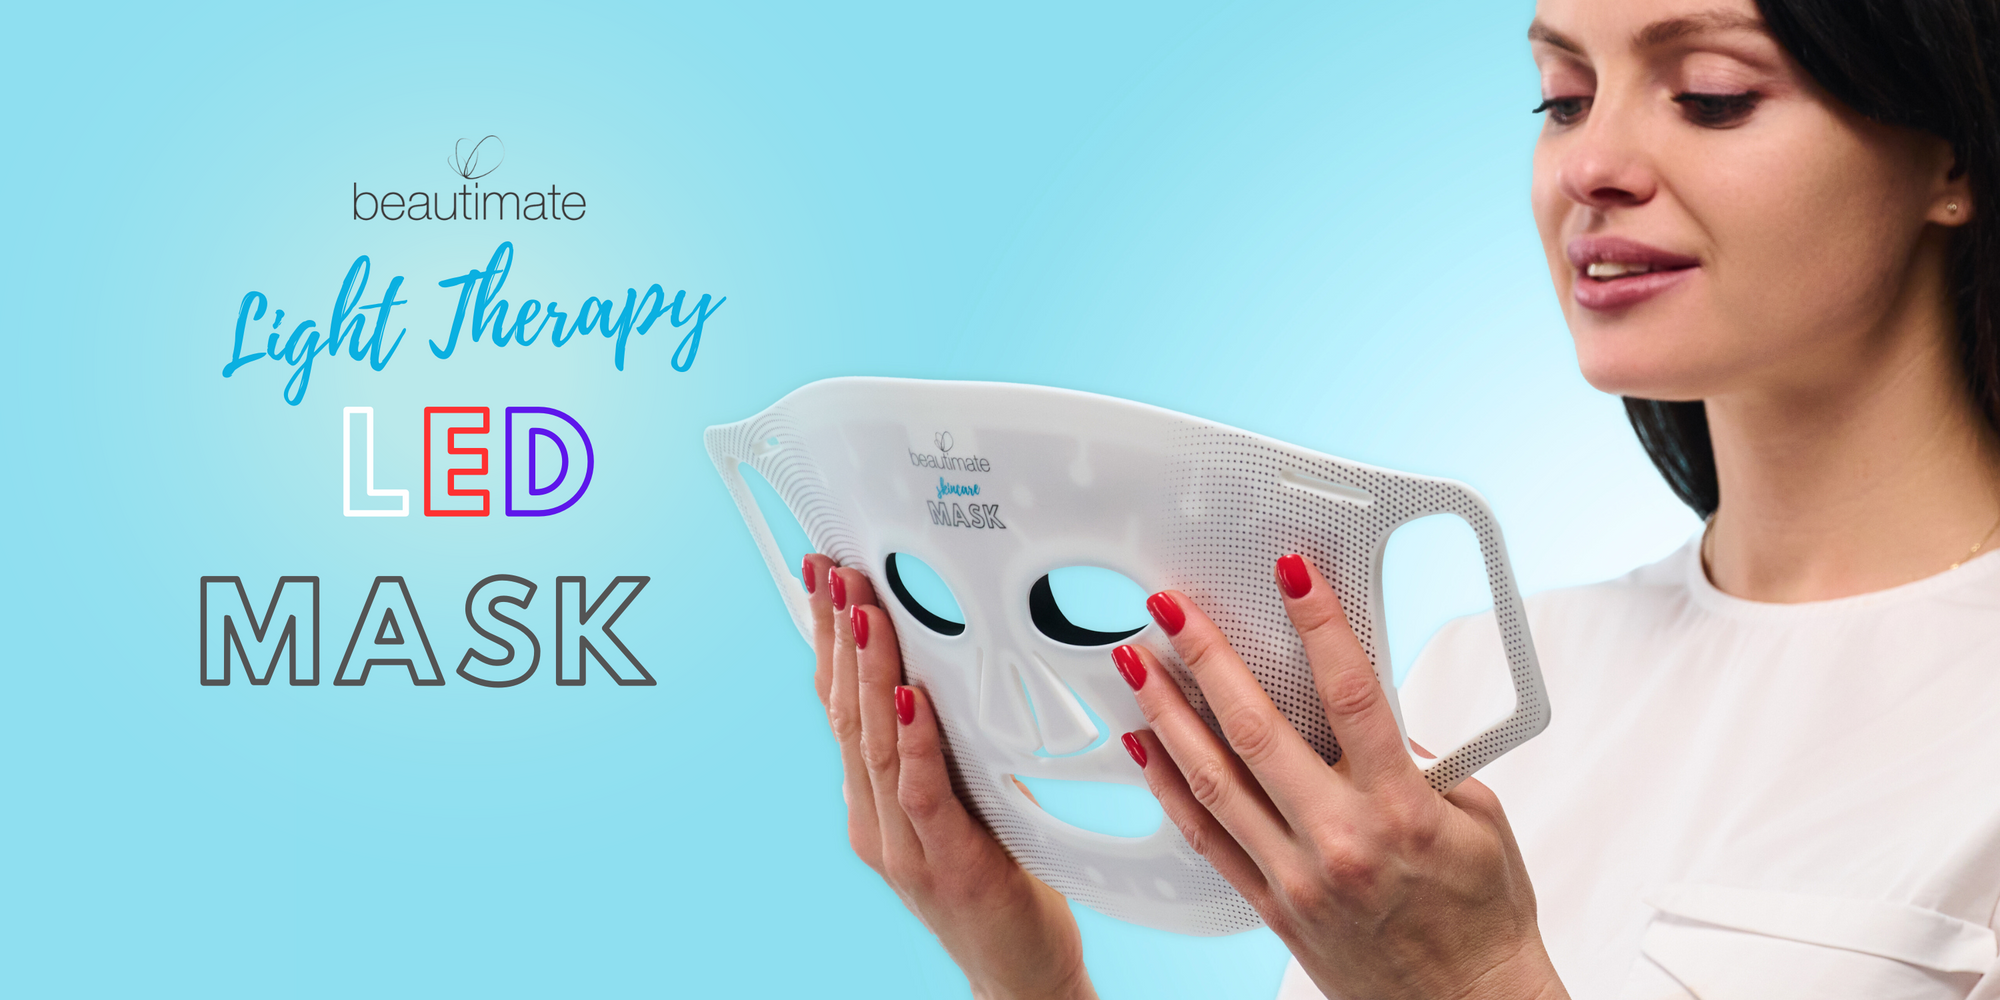 Video that shows how to use beautimate LED red, blue, infrared Therapy Light Mask